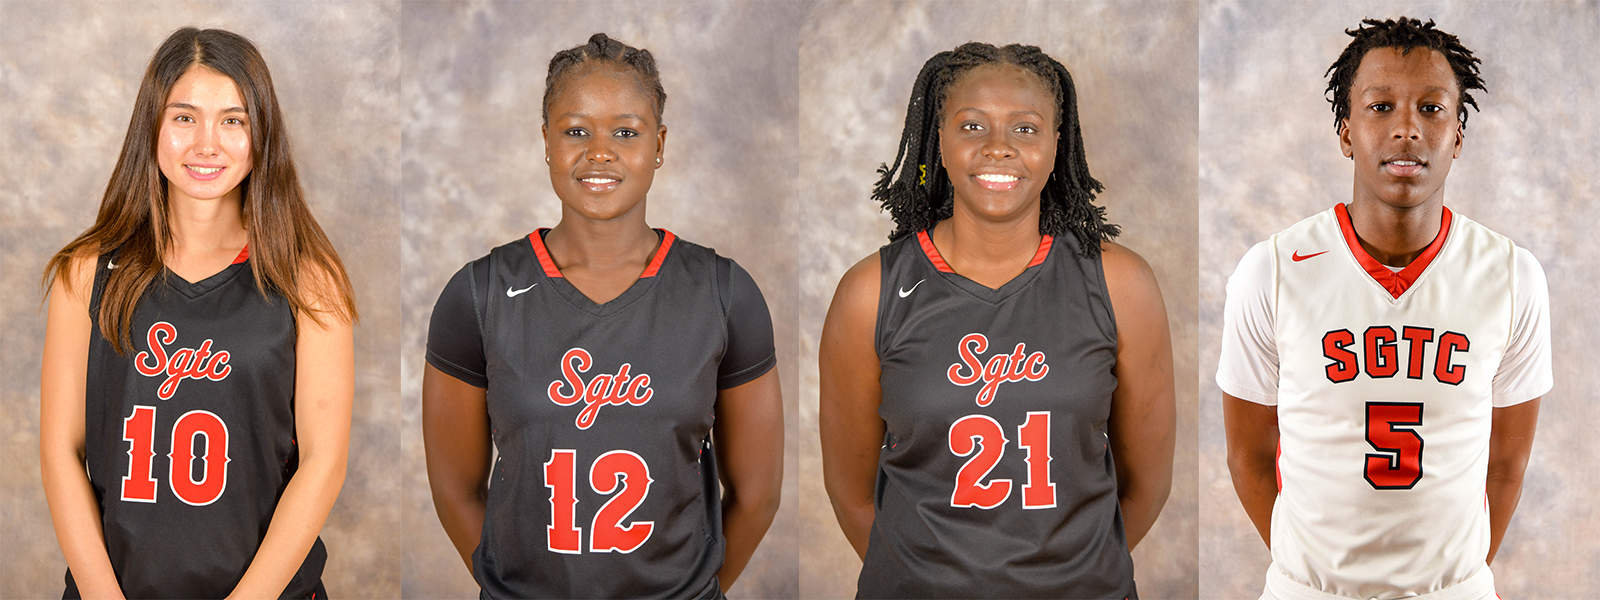 Shown above are the SGTC basketball players ranked nationally in the NJCAA Division I individual statistics January 8th poll. They are: Mari Hill, 10; Fatou Pouye, 12; Bigue Sarr, 21; and Justin Johnson, 5.